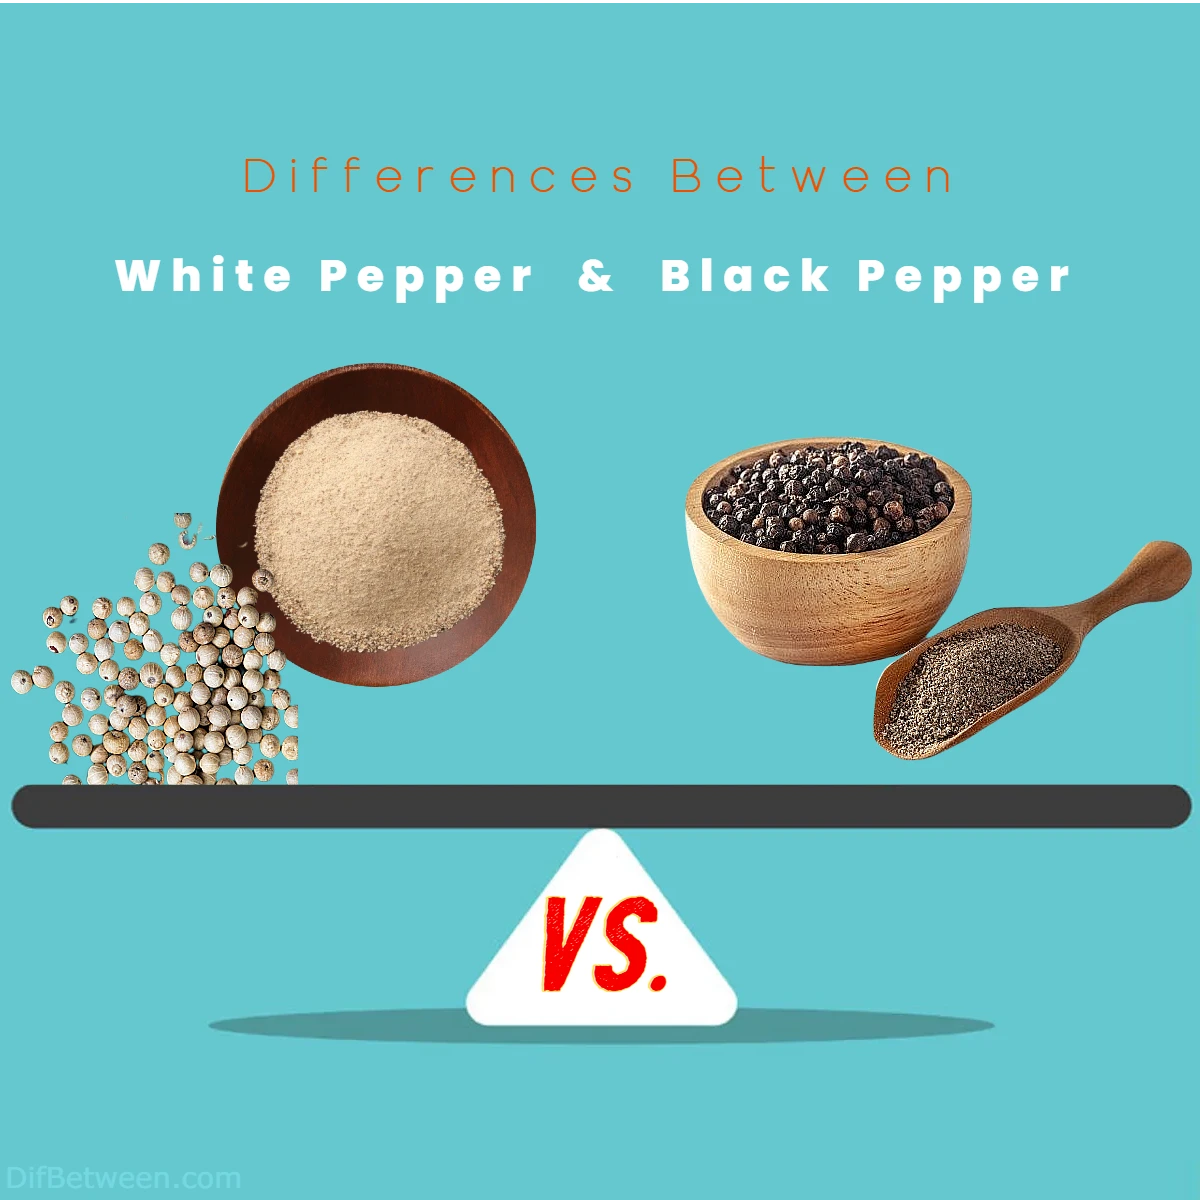 Differences Between White vs Black Pepper